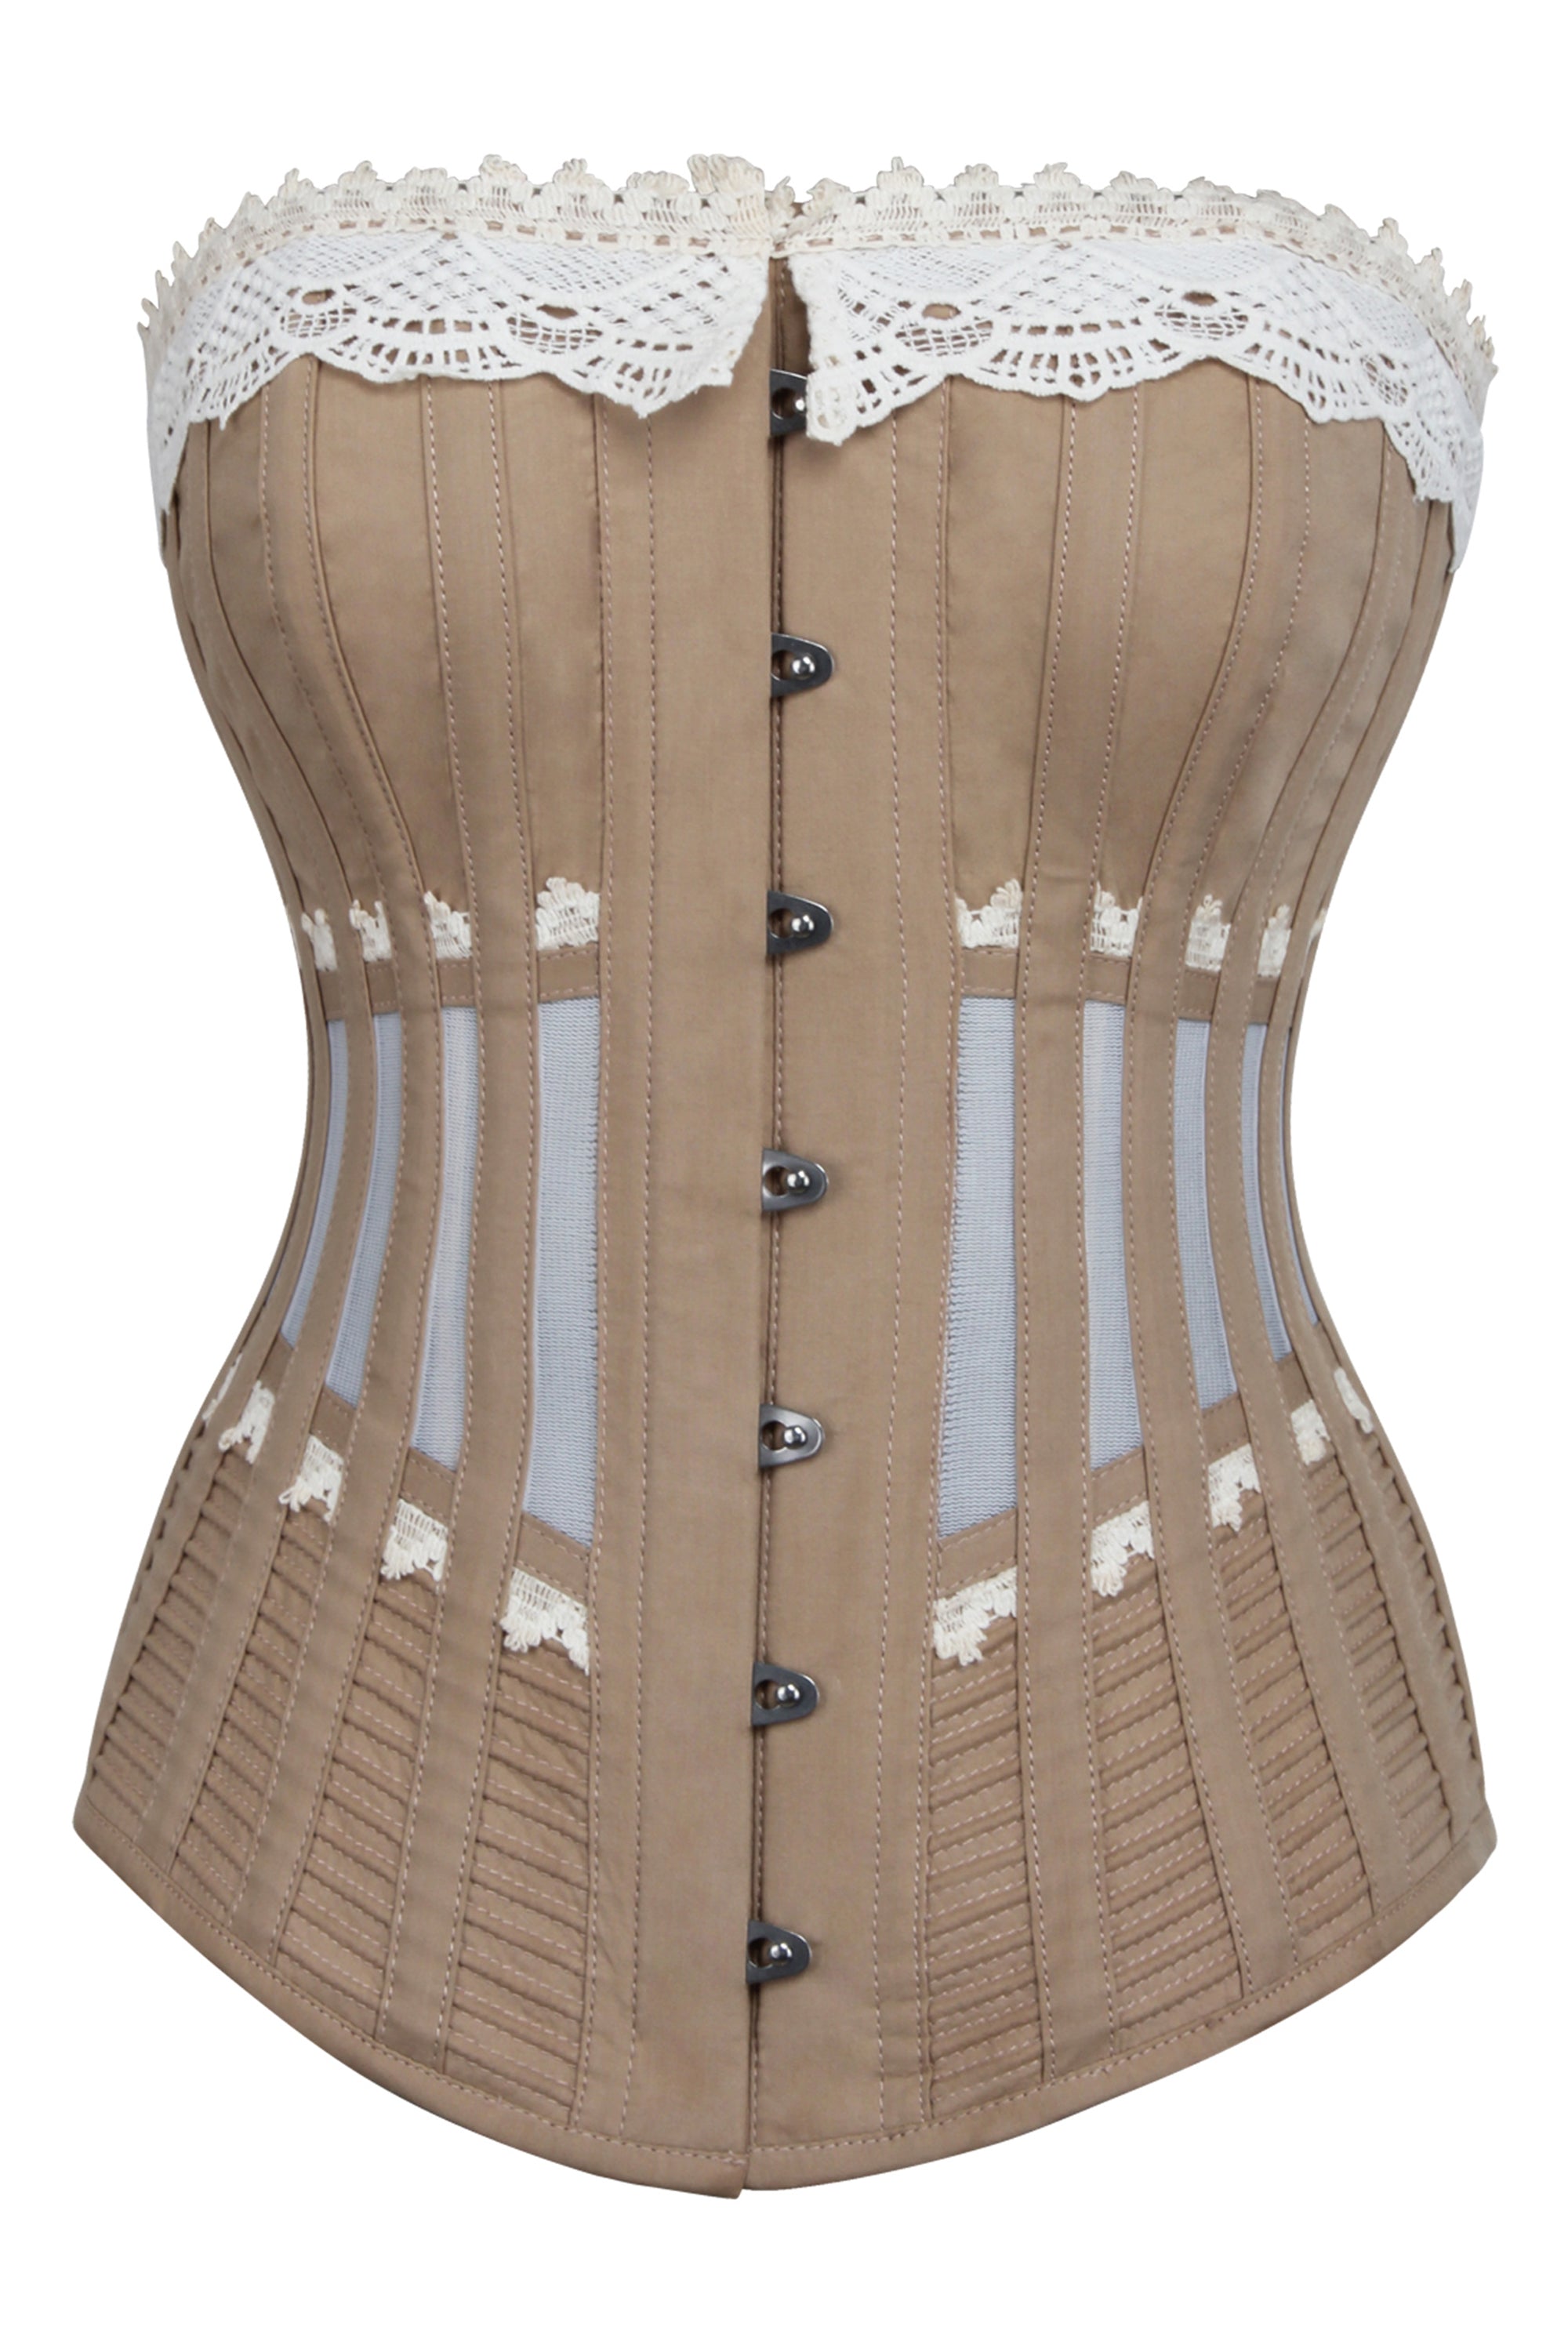 Authentic steel boned underbust corset from hand dyed real leather